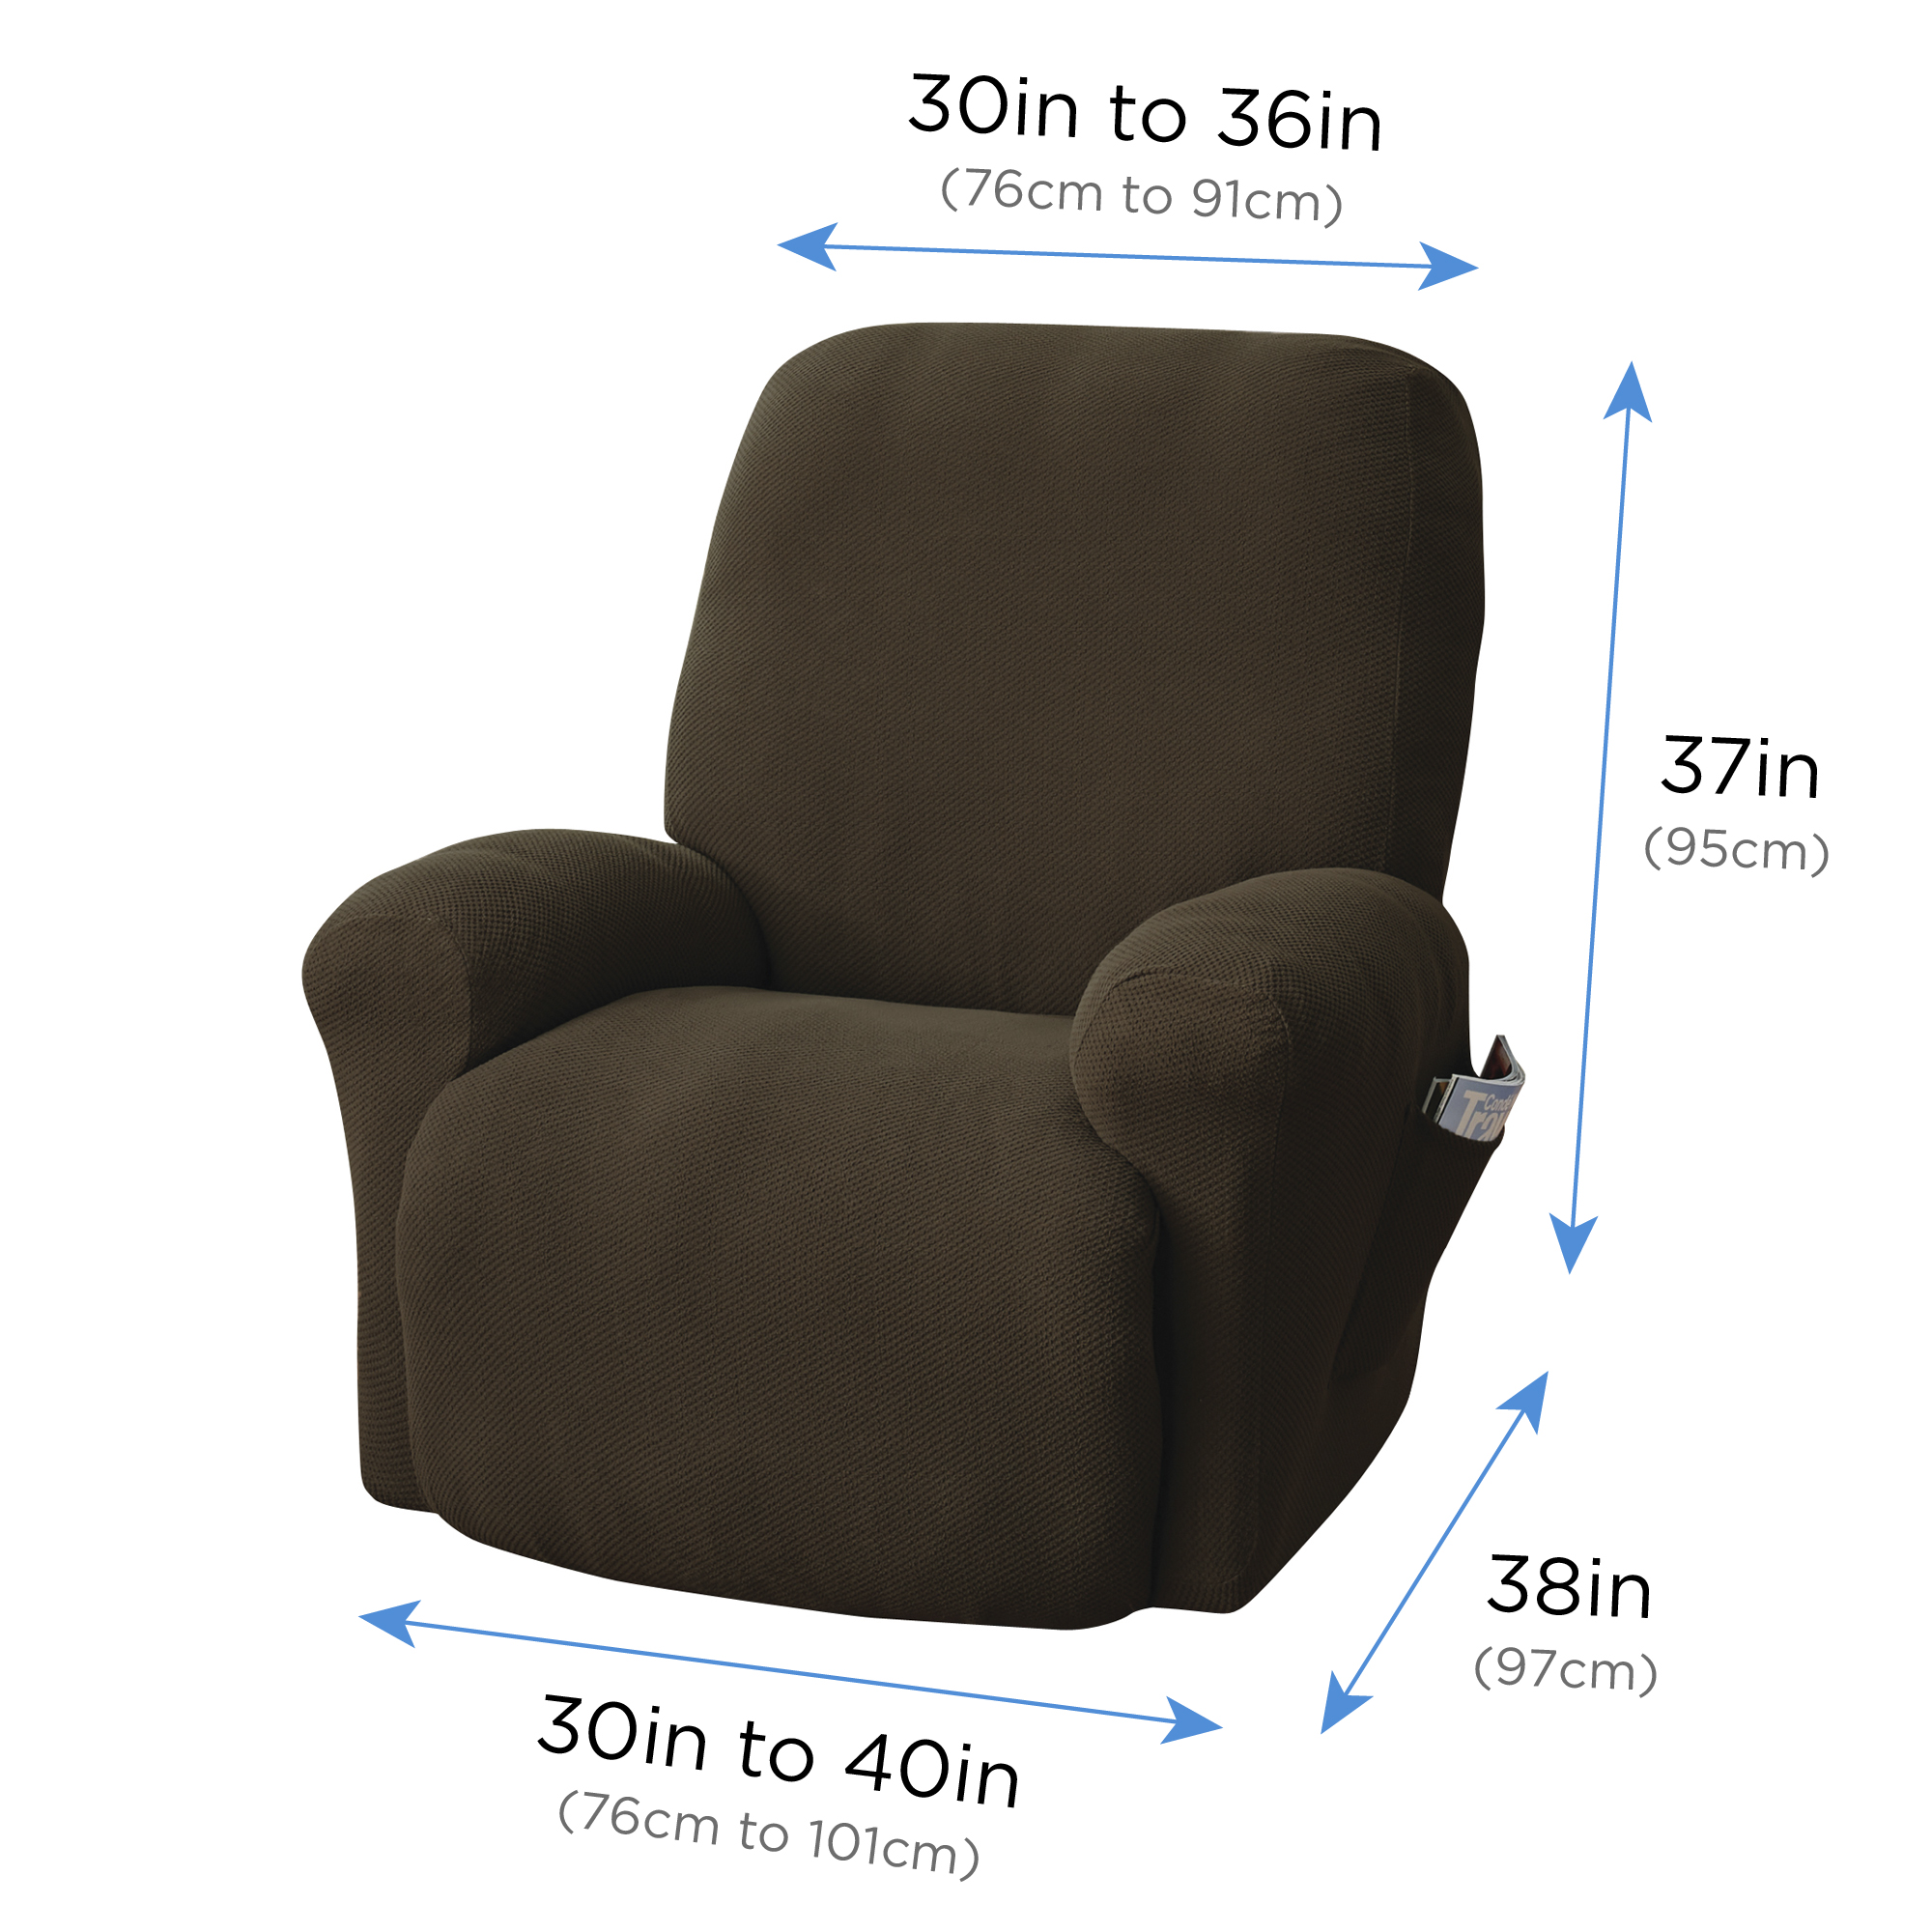 Mainstays Recliner Pixel Stretch Fabric Slipcover, Brown, 4-Piece - image 3 of 7